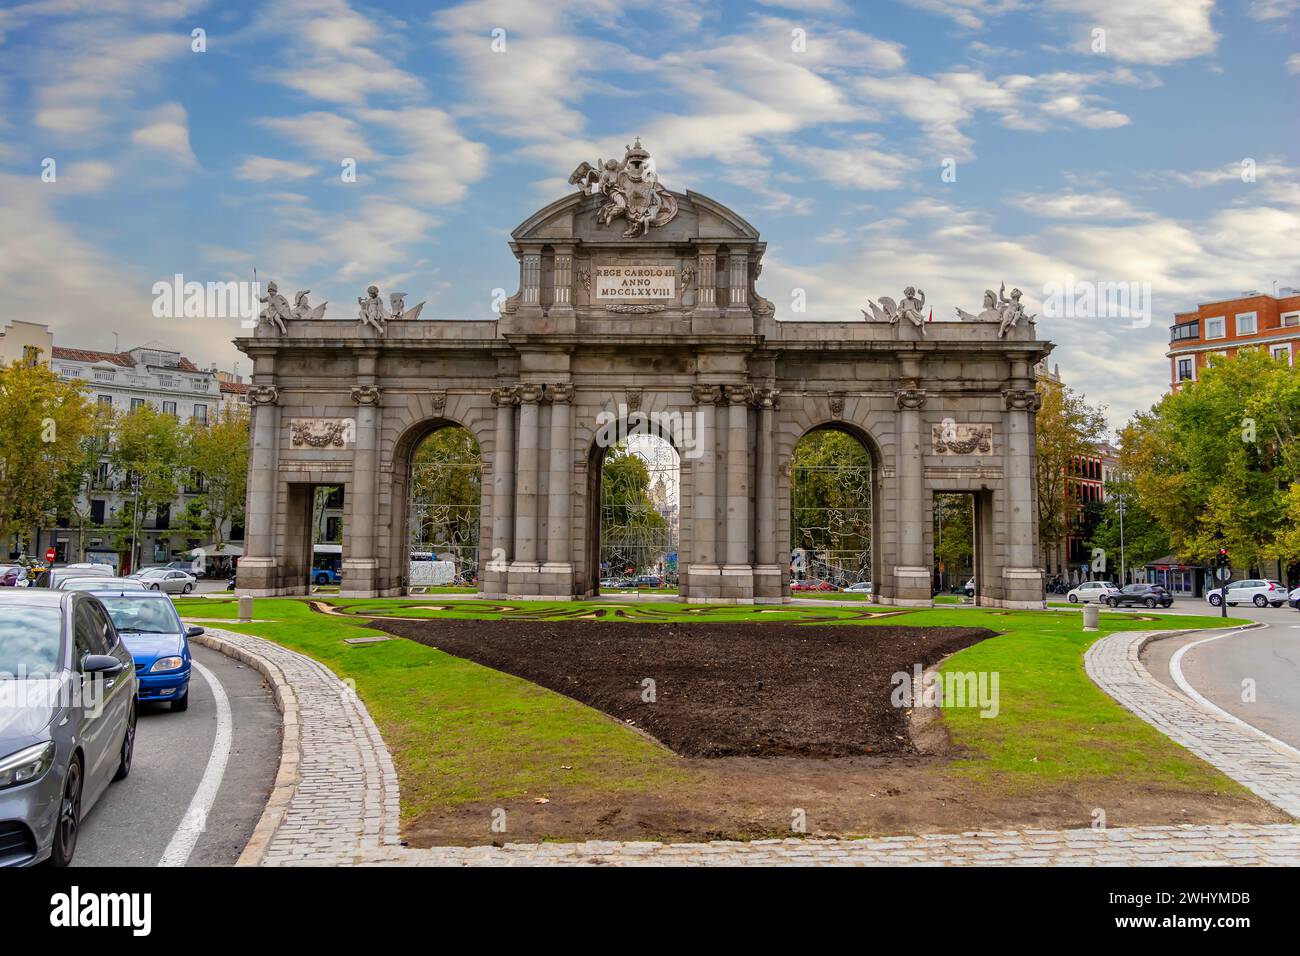 The Puerta De AlcalÃ¡ Is A Neo-Classical Gate In The Plaza De La Independencia In Madrid, Spain Stock Photo